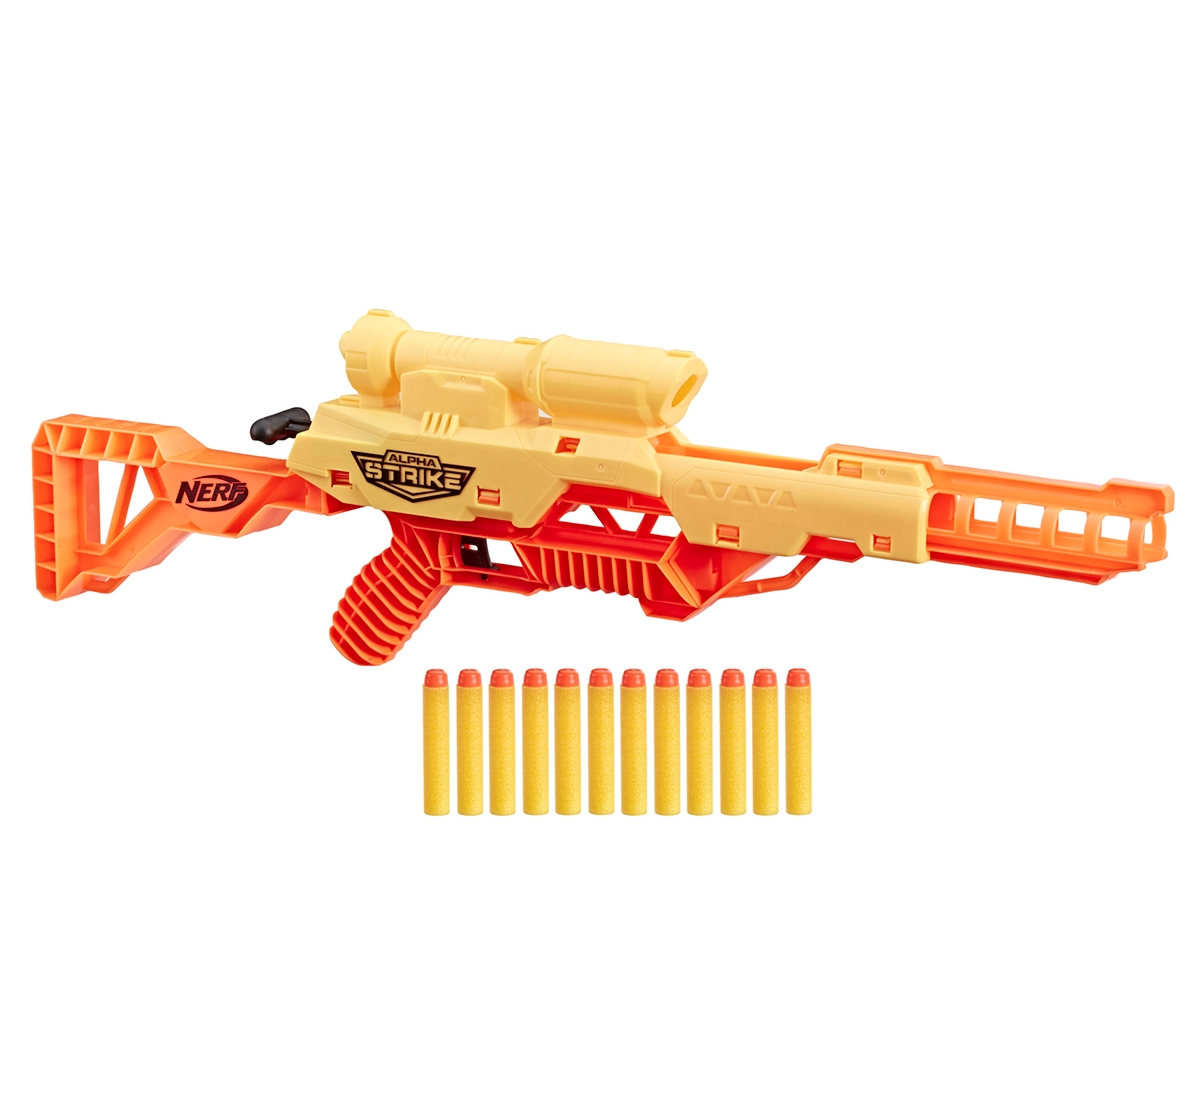 NERF Alpha Strike Wolf LR-1 Toy Blaster with Targeting Scope, Multicolour, 8Y+